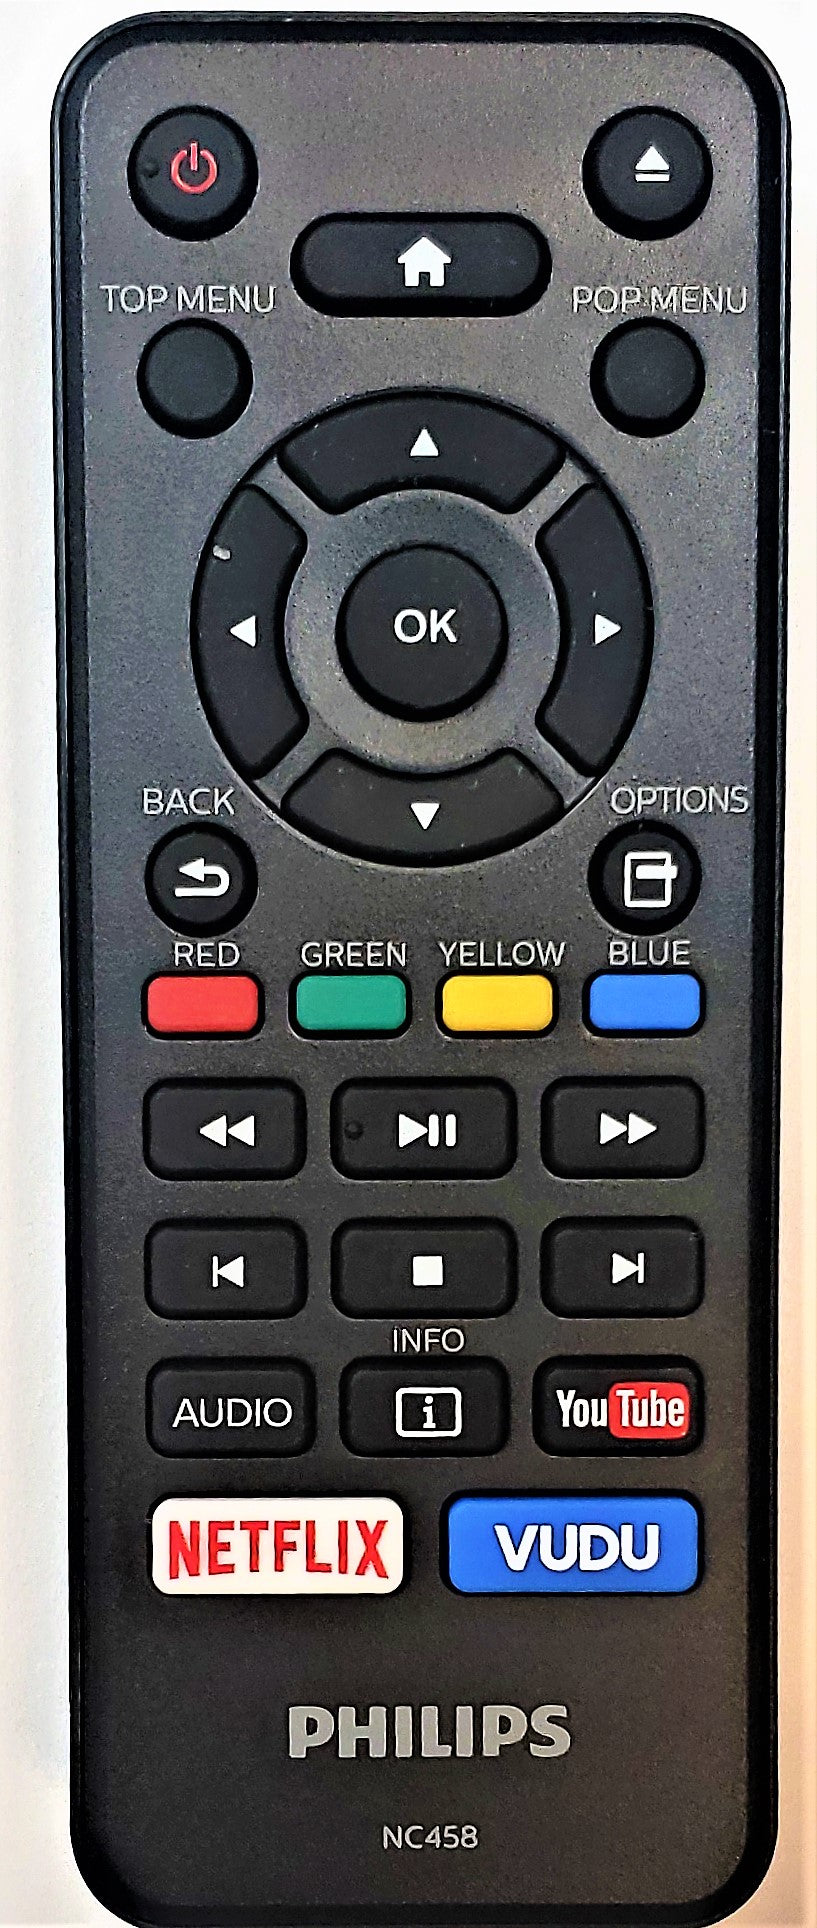 Original OEM replacement remote control for Philips Blu-ray players NC458UL